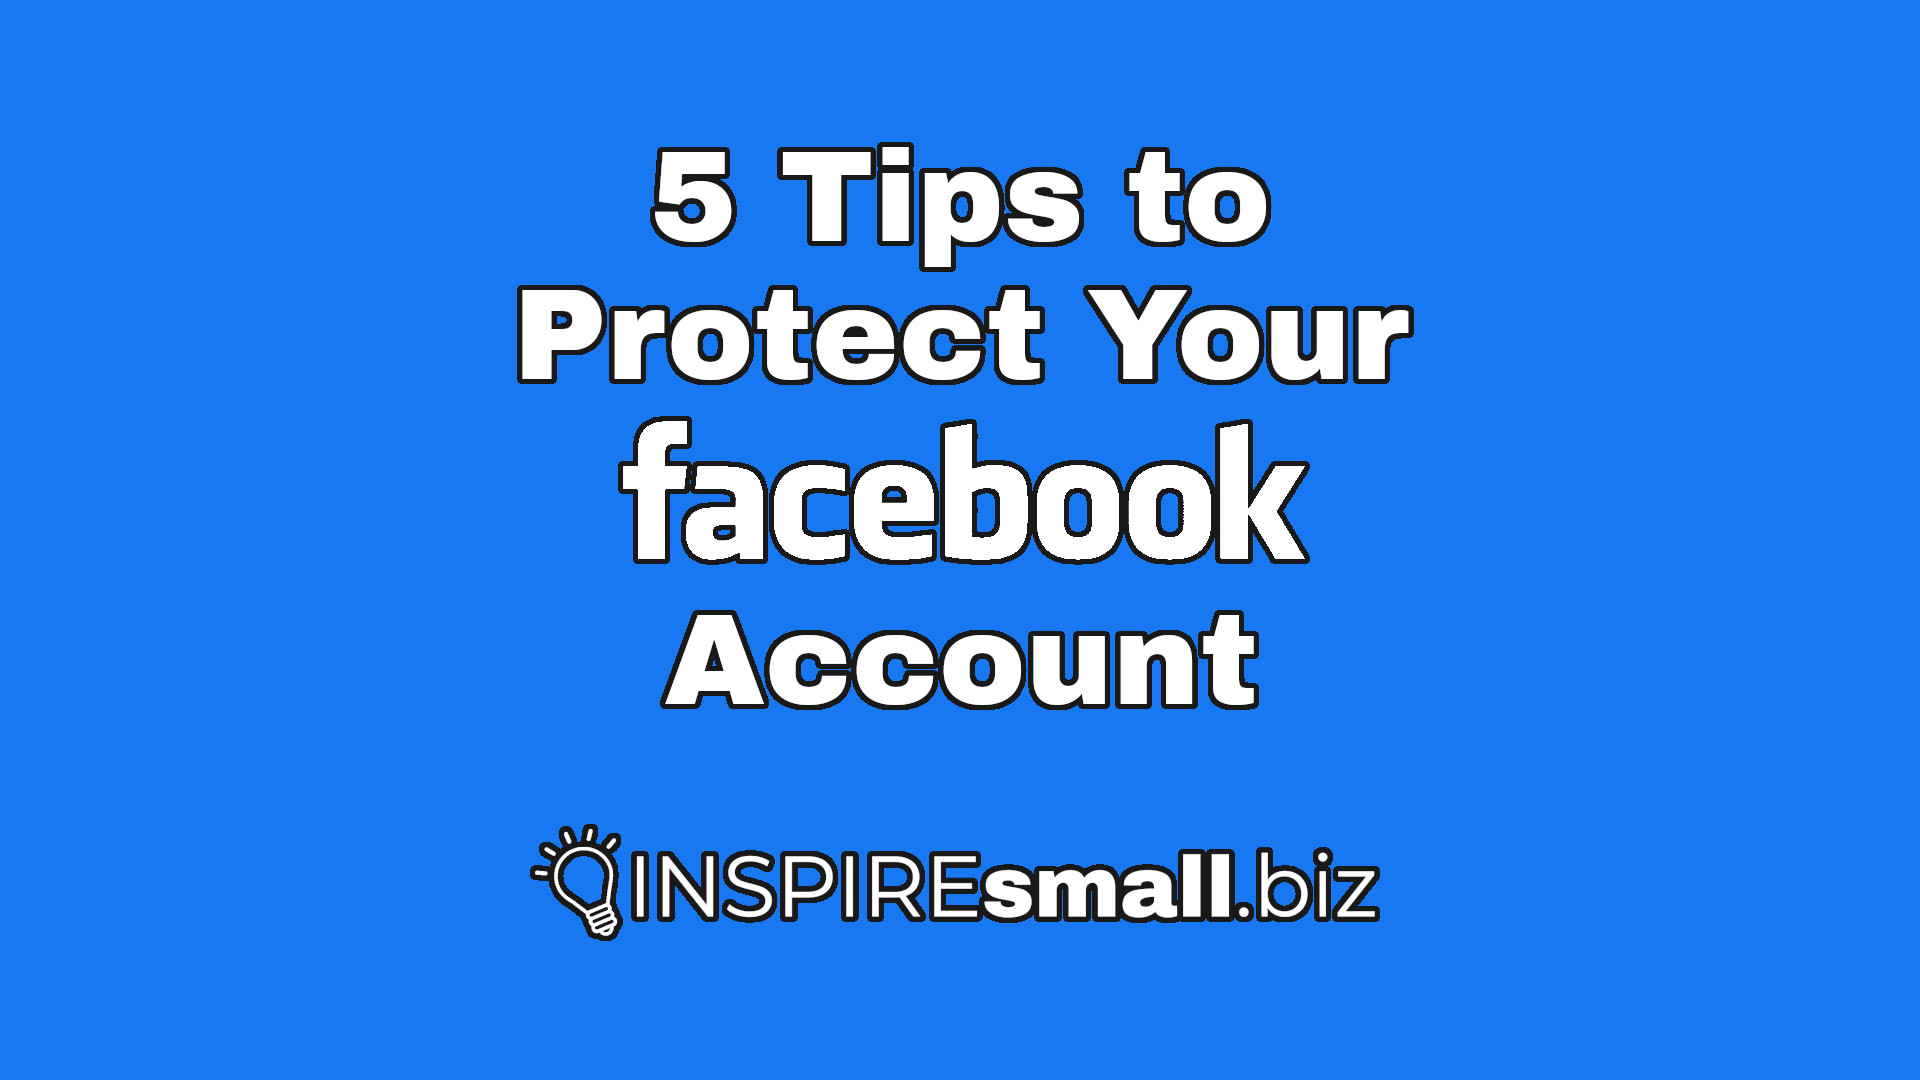 5 Tips to Protect Your Facebook Account